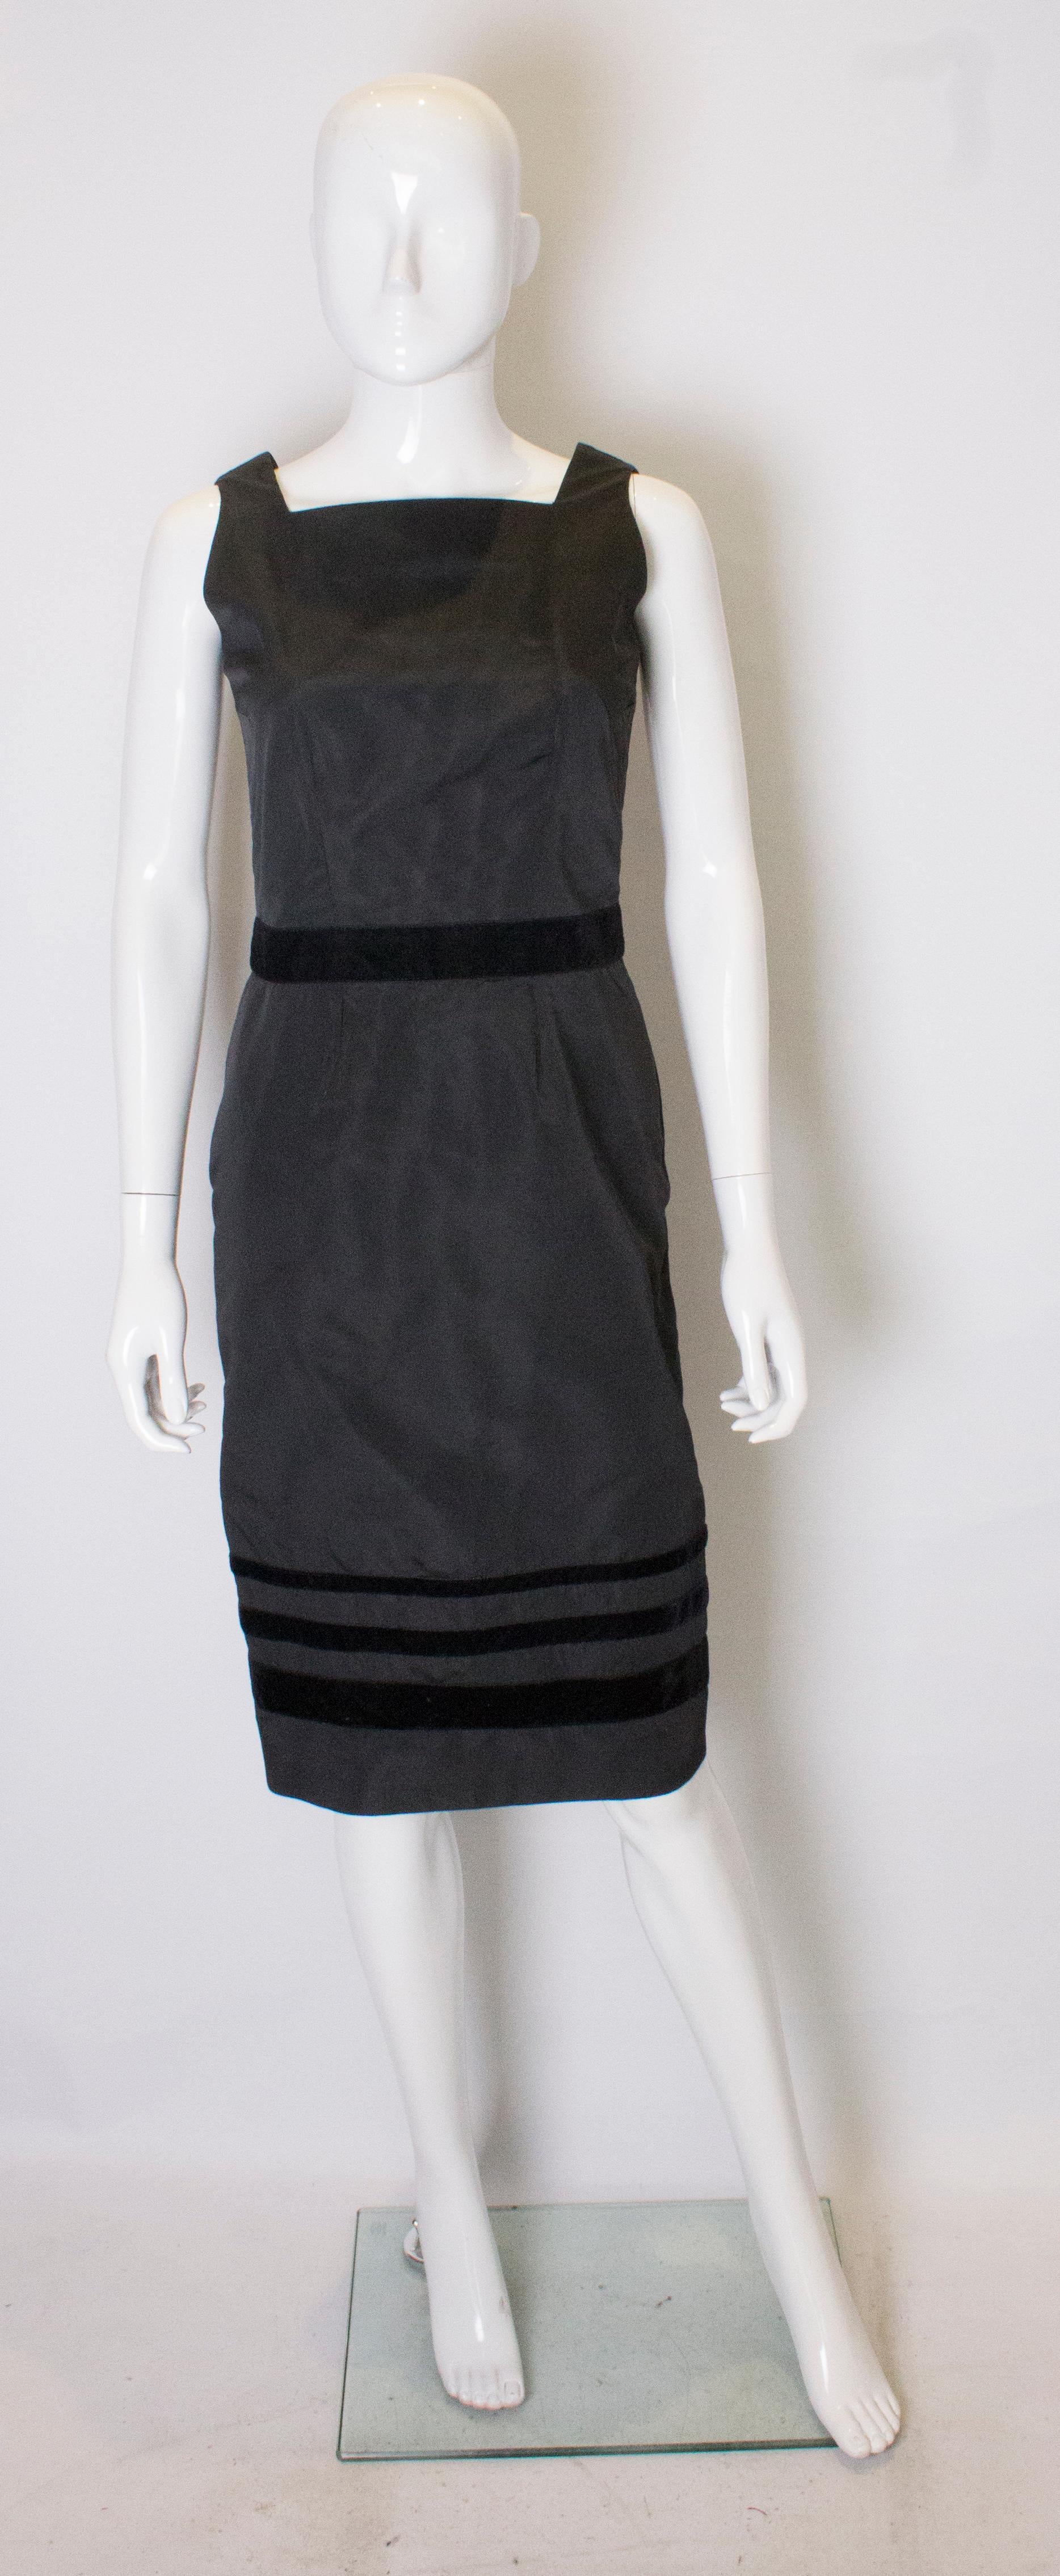 A chic cocktail dress from Tomasz Starzewski. The dress has velvet detail at the waist and hem, has a central back zip and is fully lined.